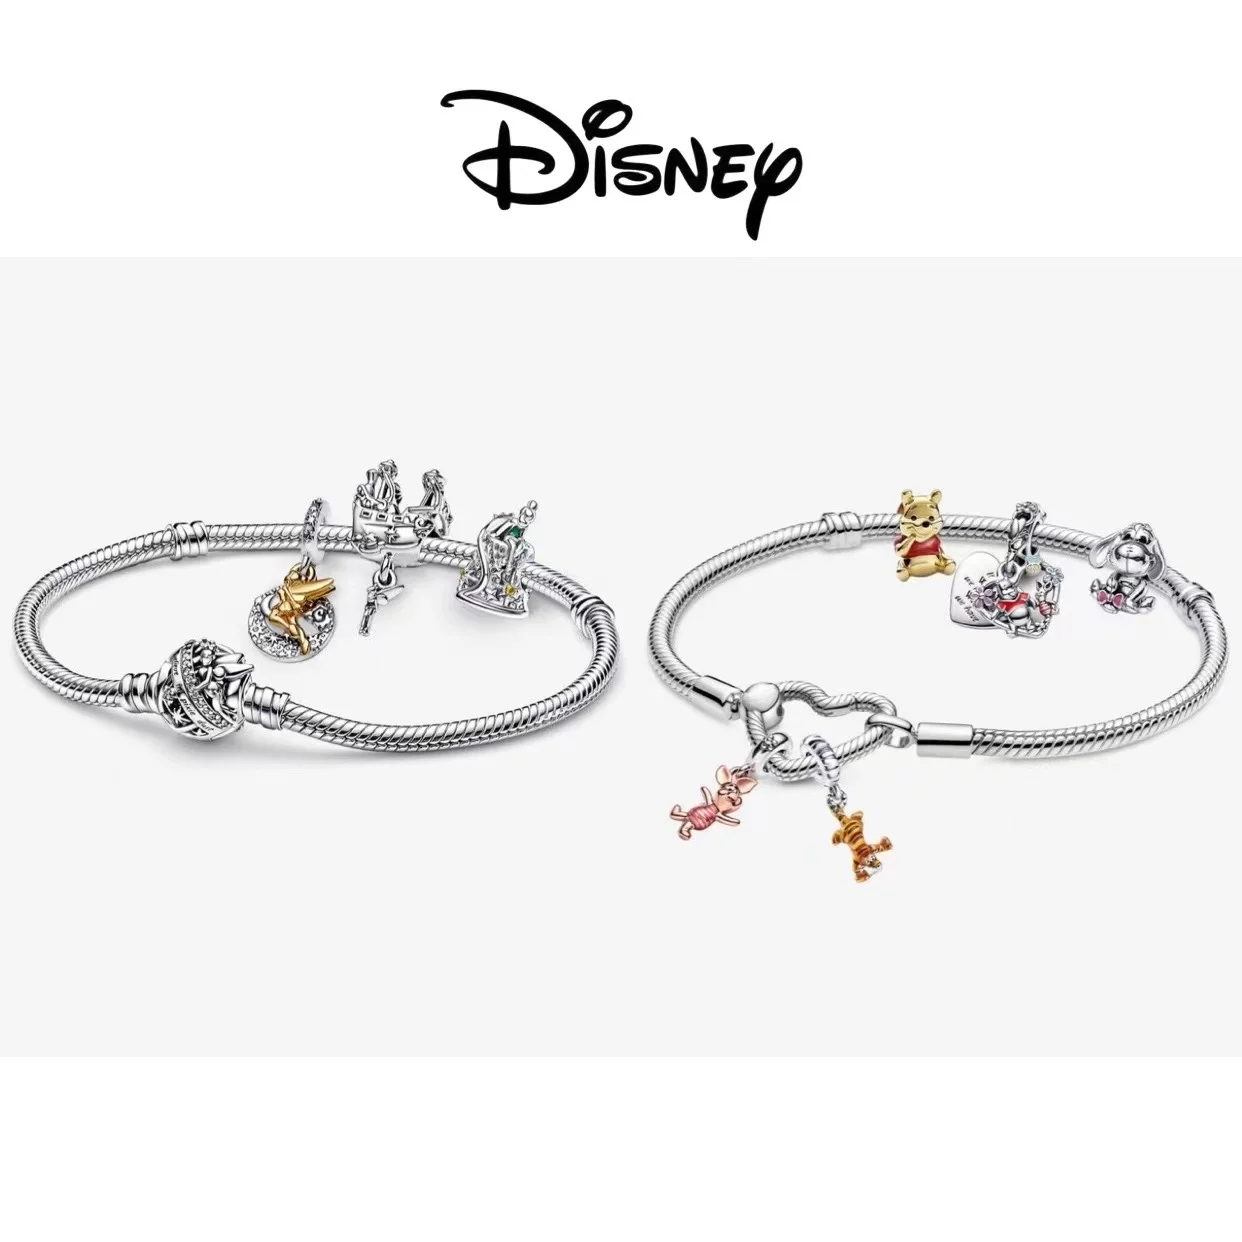 

Disney 925 Sterling Silver Bracelet Moments Sparkling Mickey Mouse Heart Clasp Snake Chain Bracelet for Women DIY Charms Beads